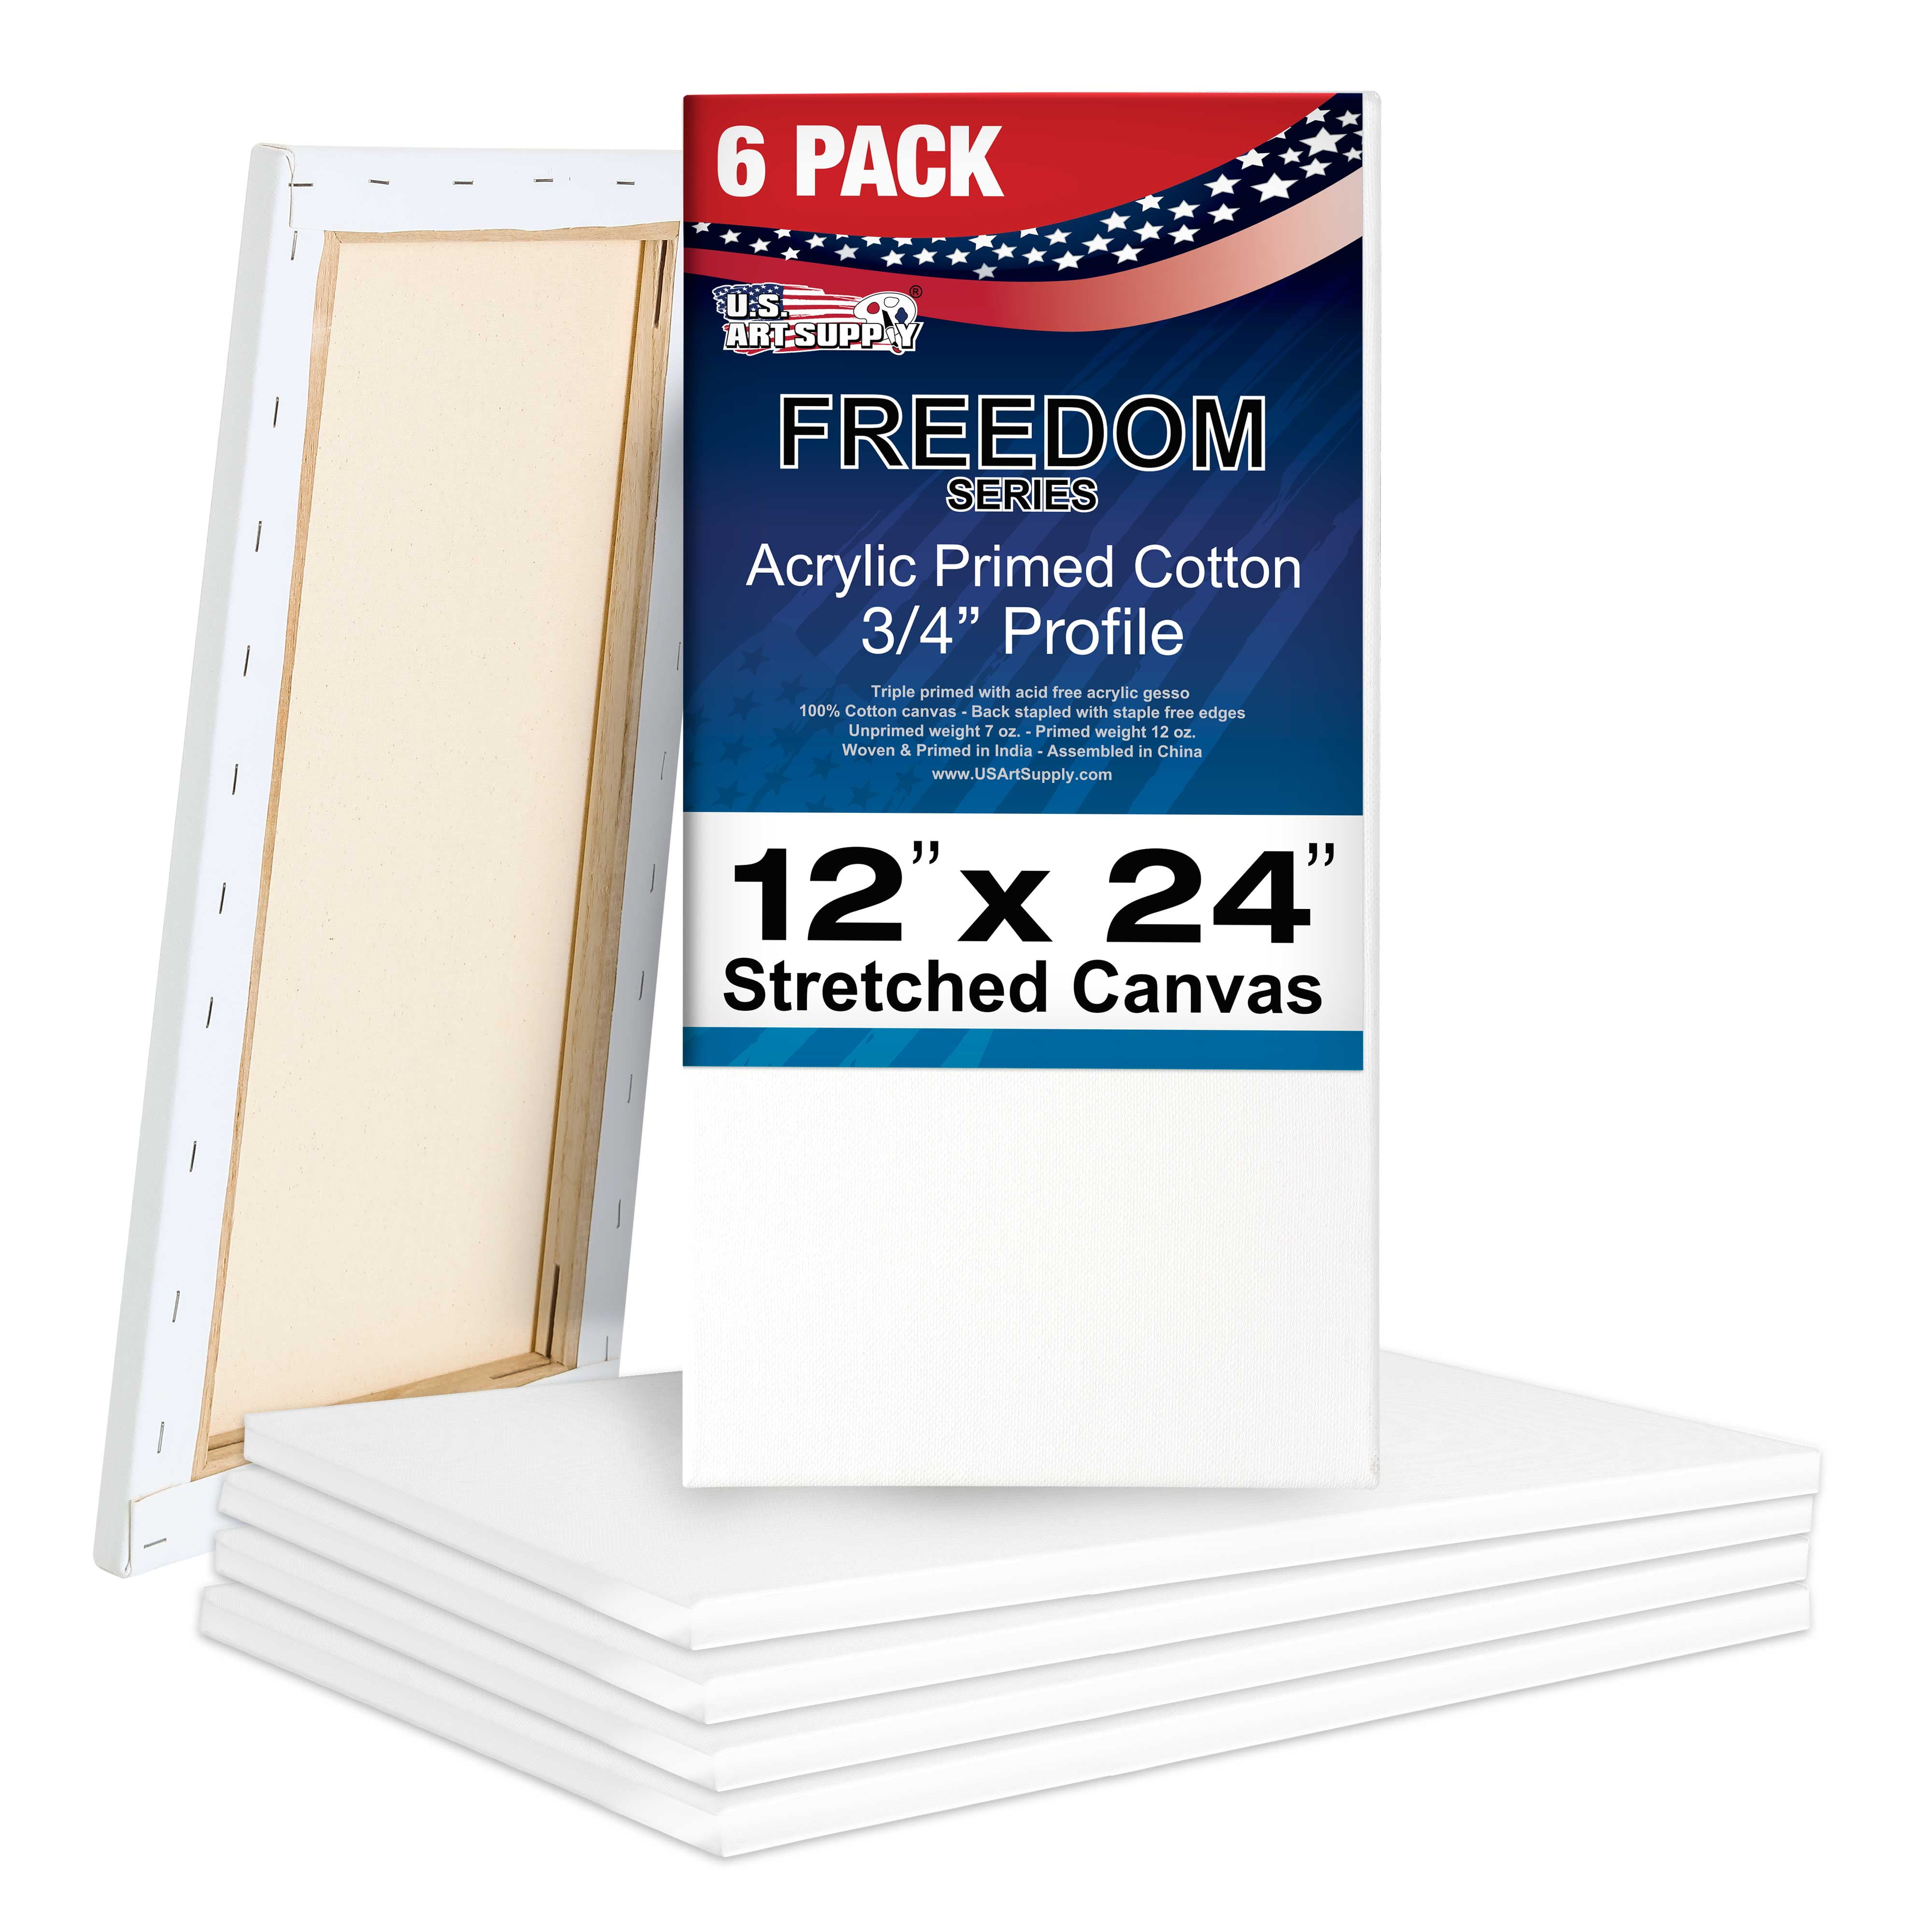 U.S. Art Supply 20 x 30 inch Stretched Canvas 12-Ounce Triple Primed,  6-Pack - Professional Artist Quality White Blank 3/4 Profile, 100% Cotton